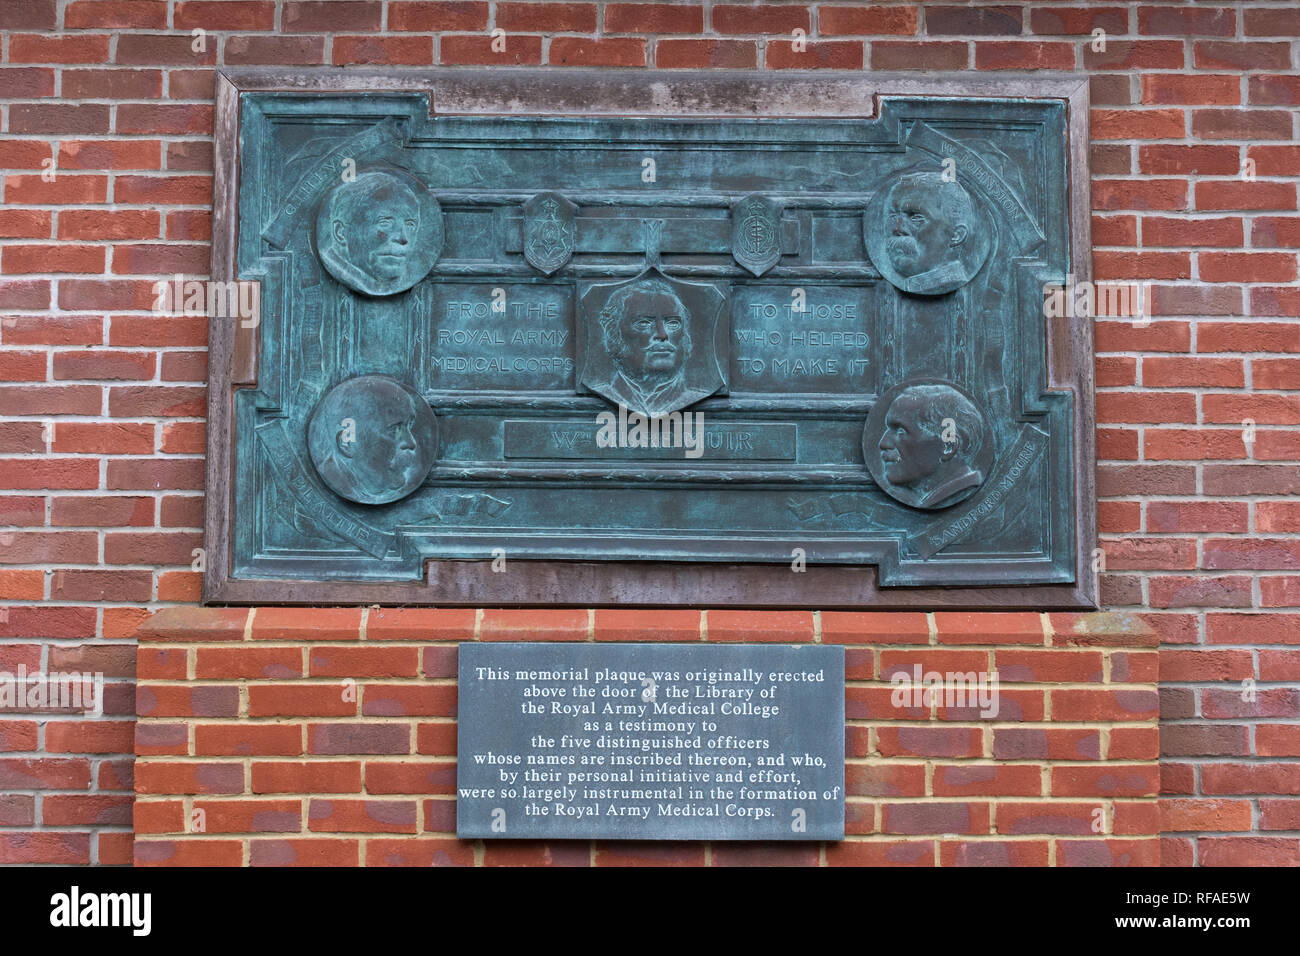 Memorial plaque to 5 members of the Royal Army Medical Corps on the exterior wall of the Museum of Military Medicine, Keogh Barracks, Surrey, UK Stock Photo